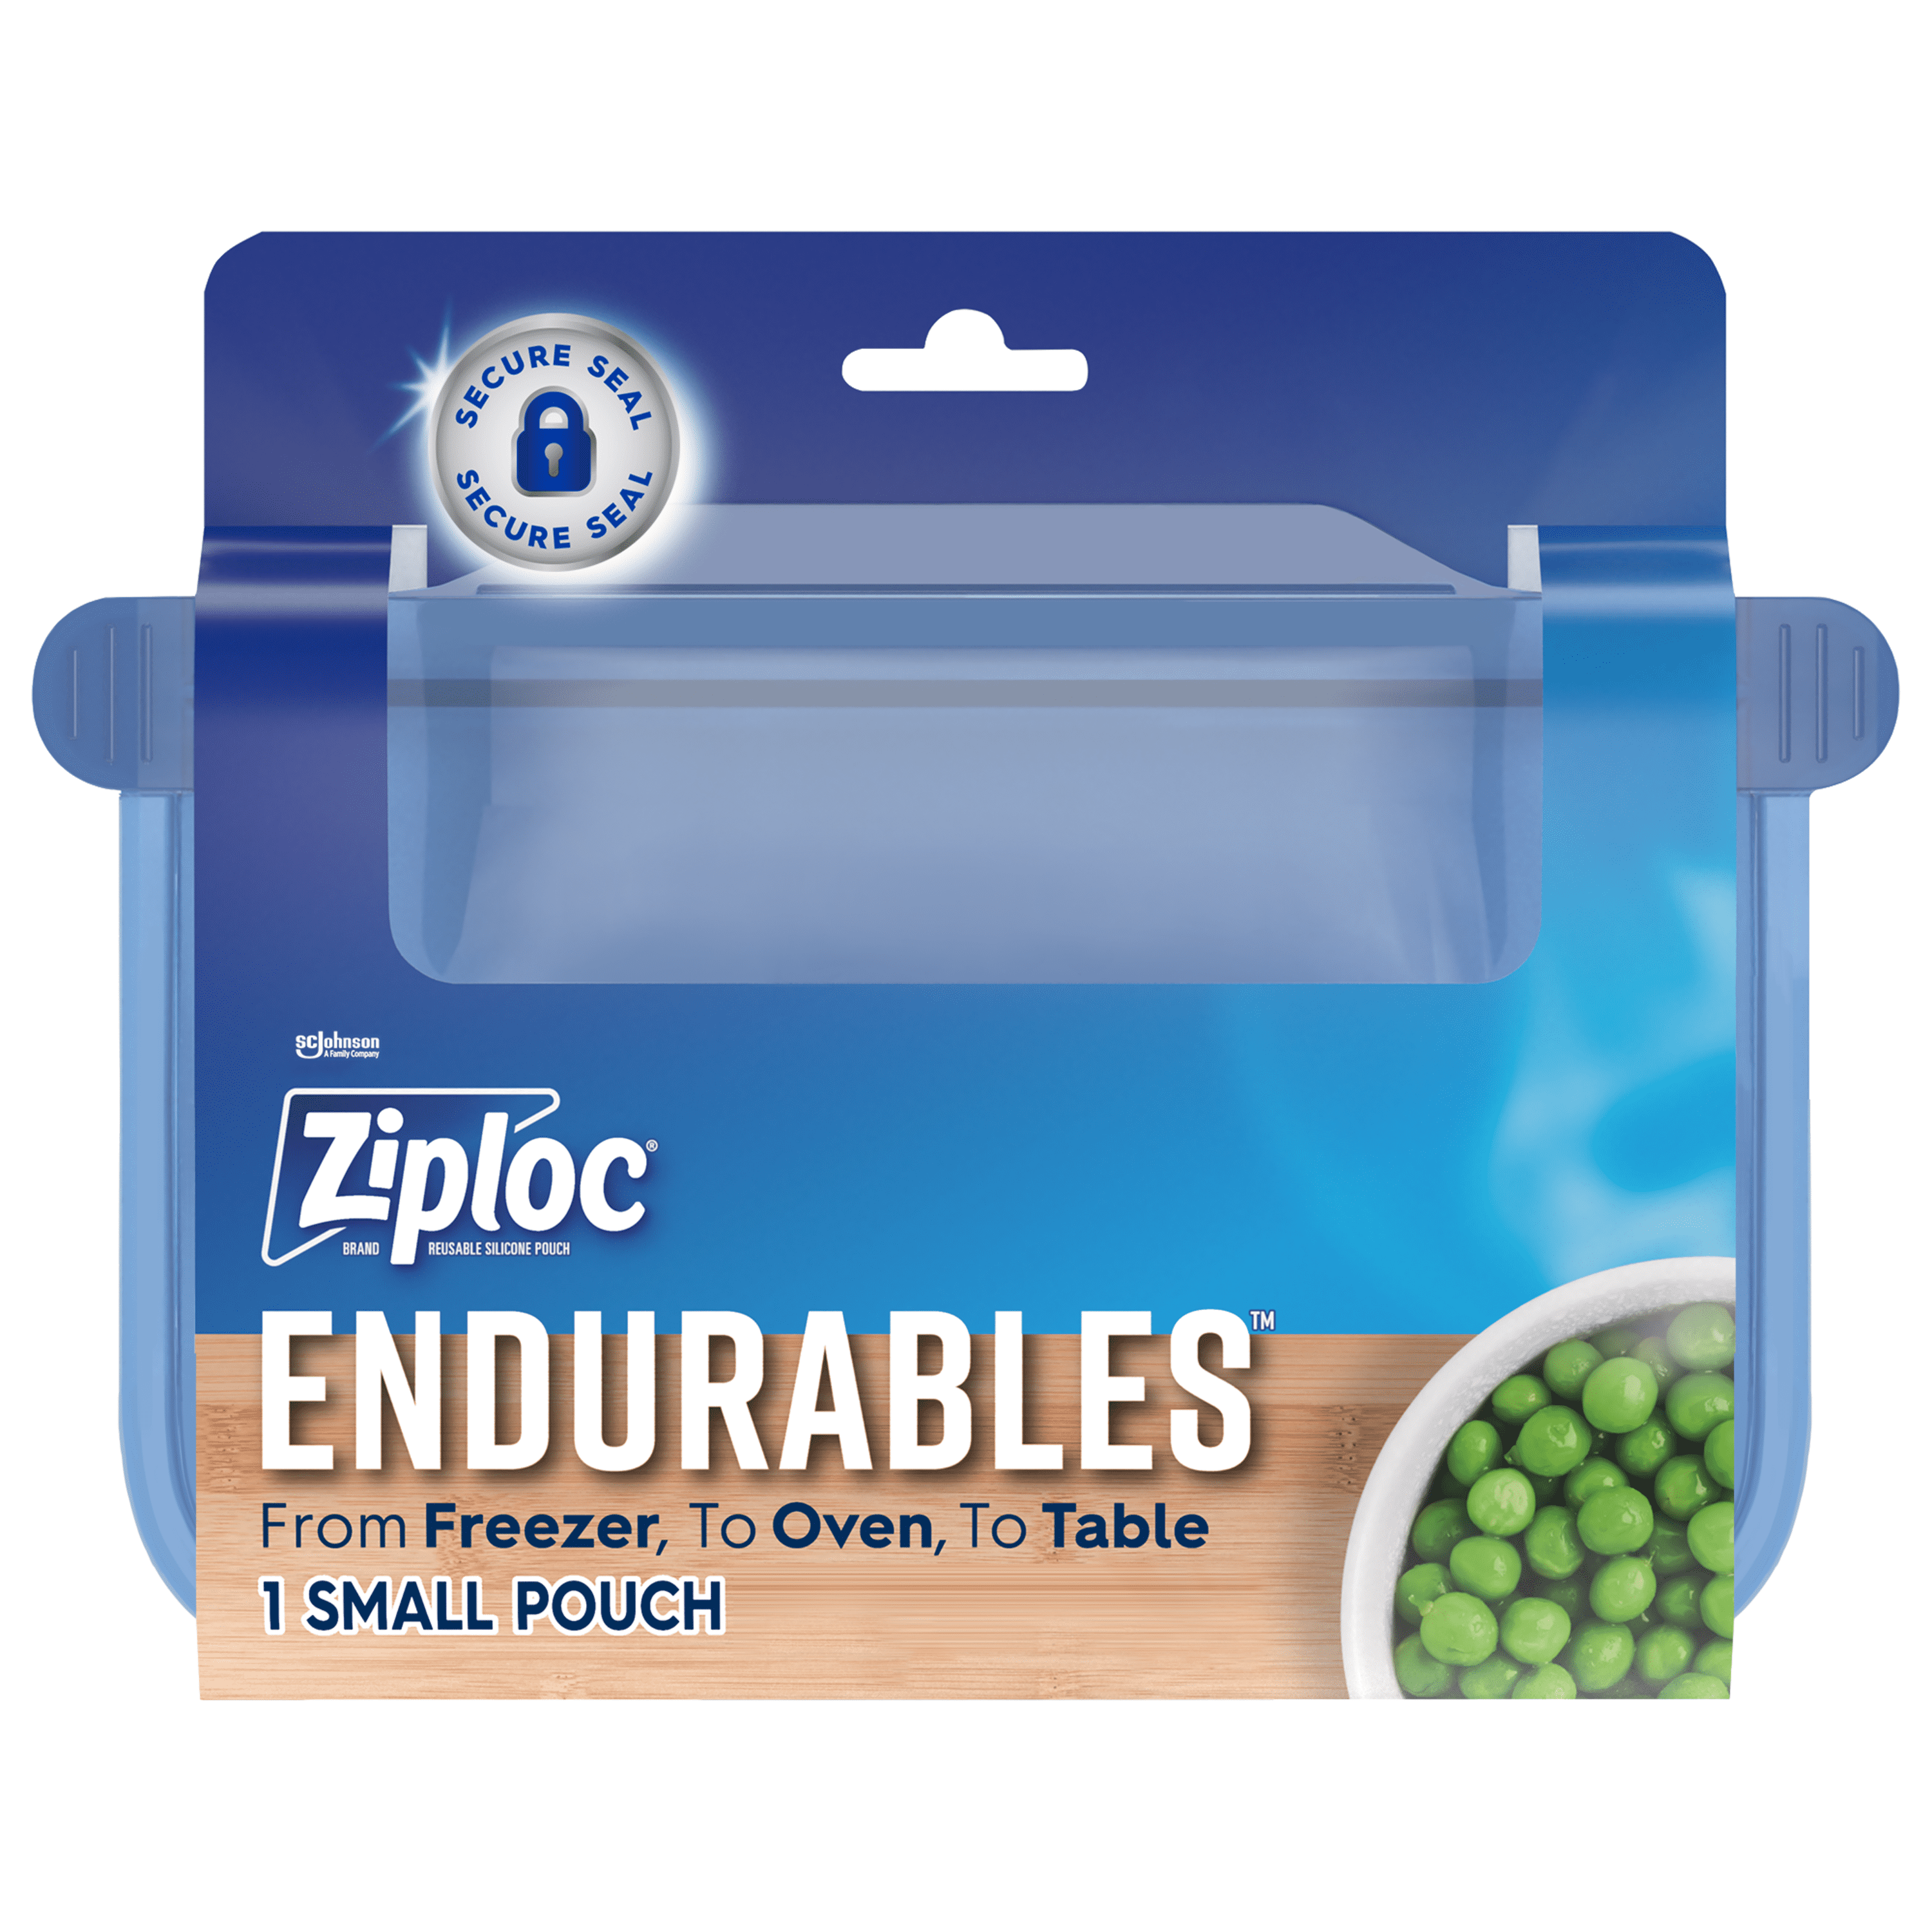 Ziploc® Endurables™ Small Pouch, 1 Cup, 8 fl Oz, Reusable Silicone, From  Freezer, to Oven, to Table 